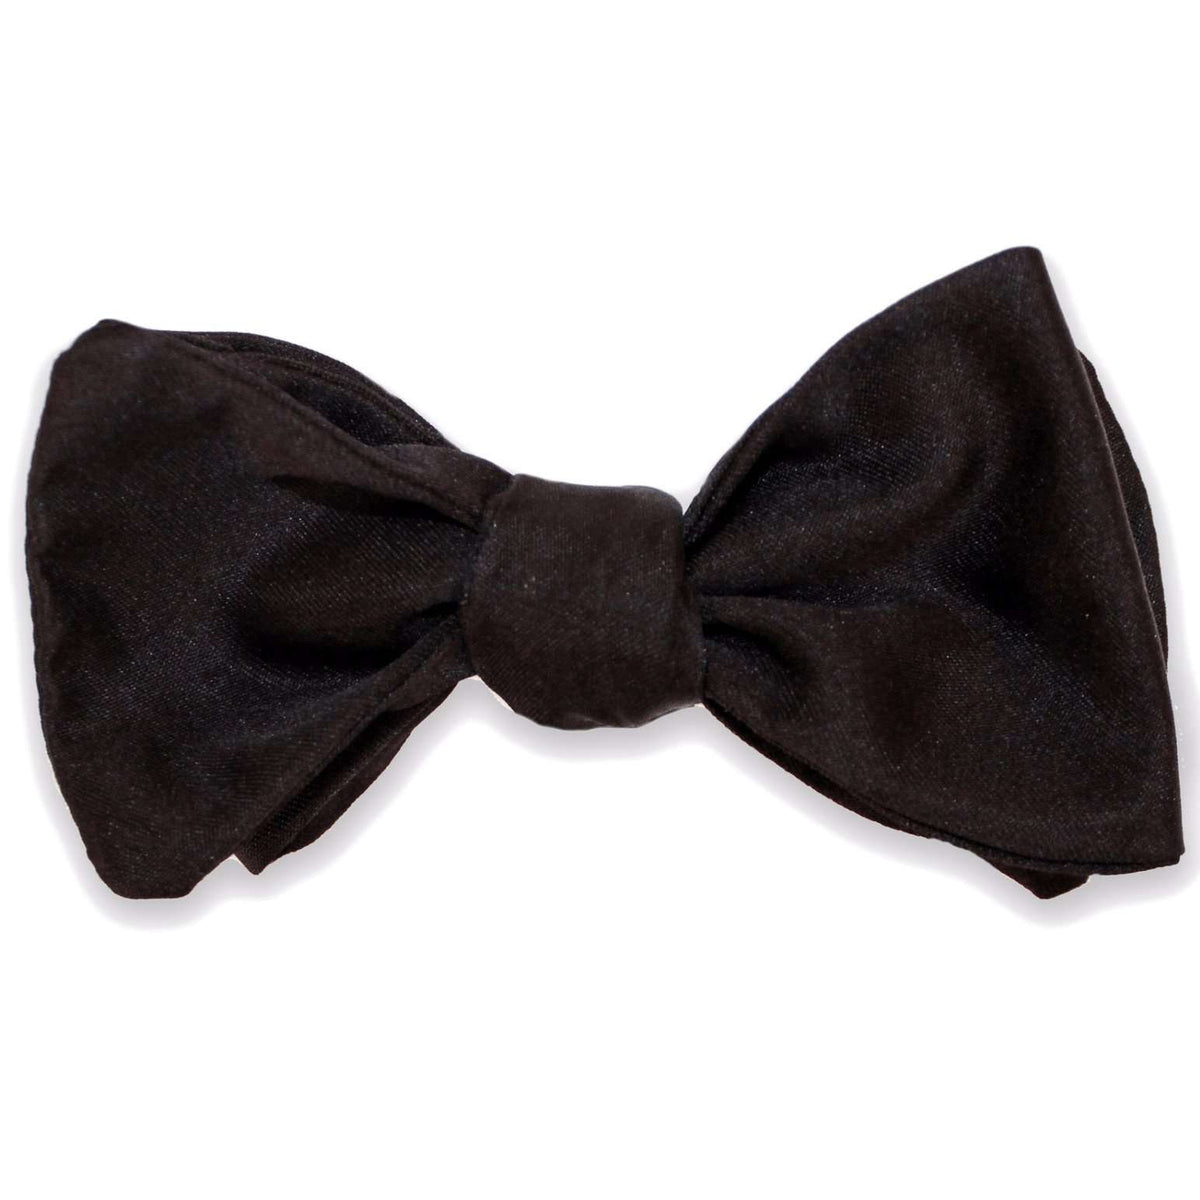 Satin Bow Tie in Black by High Cotton - Country Club Prep